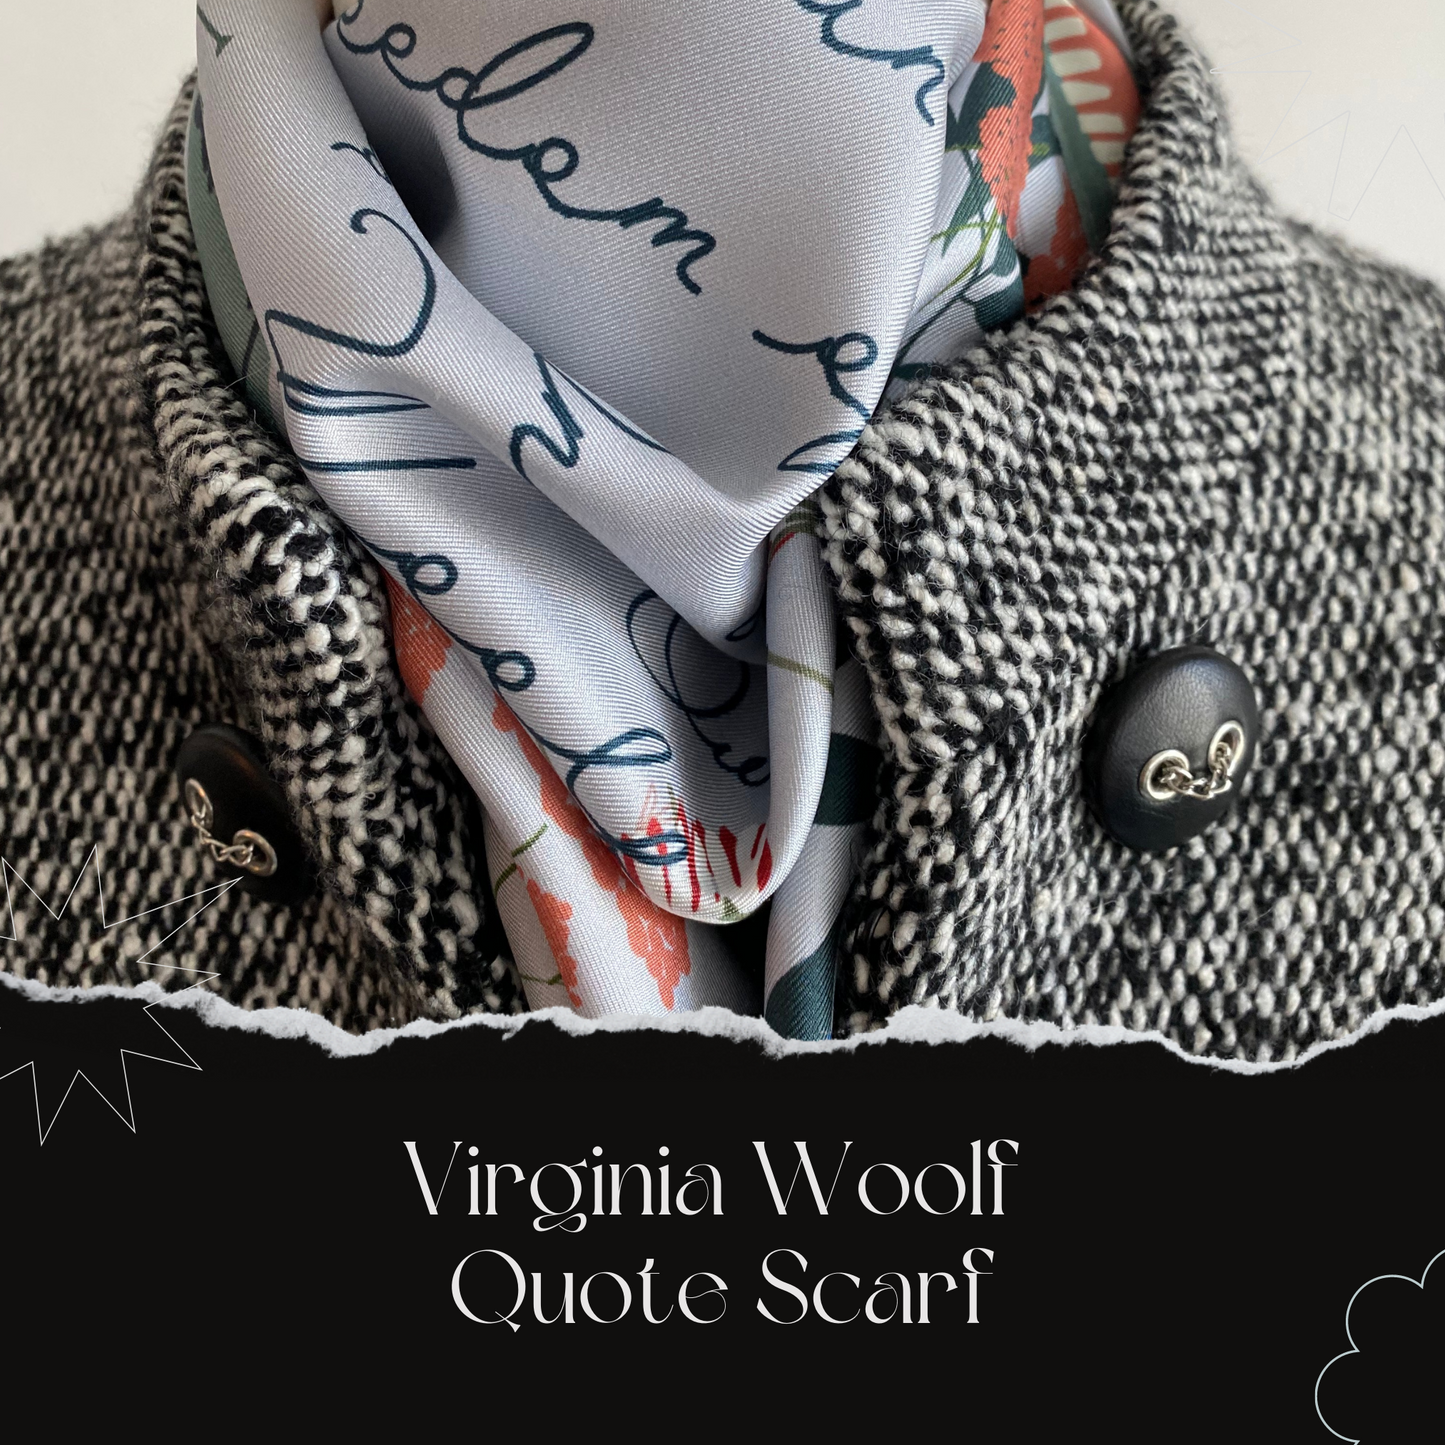 This bookish silk scarf is a beautiful tribute to Virginia Woolf&#39;s classic essay, A Room of One&#39;s Own. It features an inspiring quote from the essay printed in an elegant calligraphy font. The scarf is made from high-quality silk.